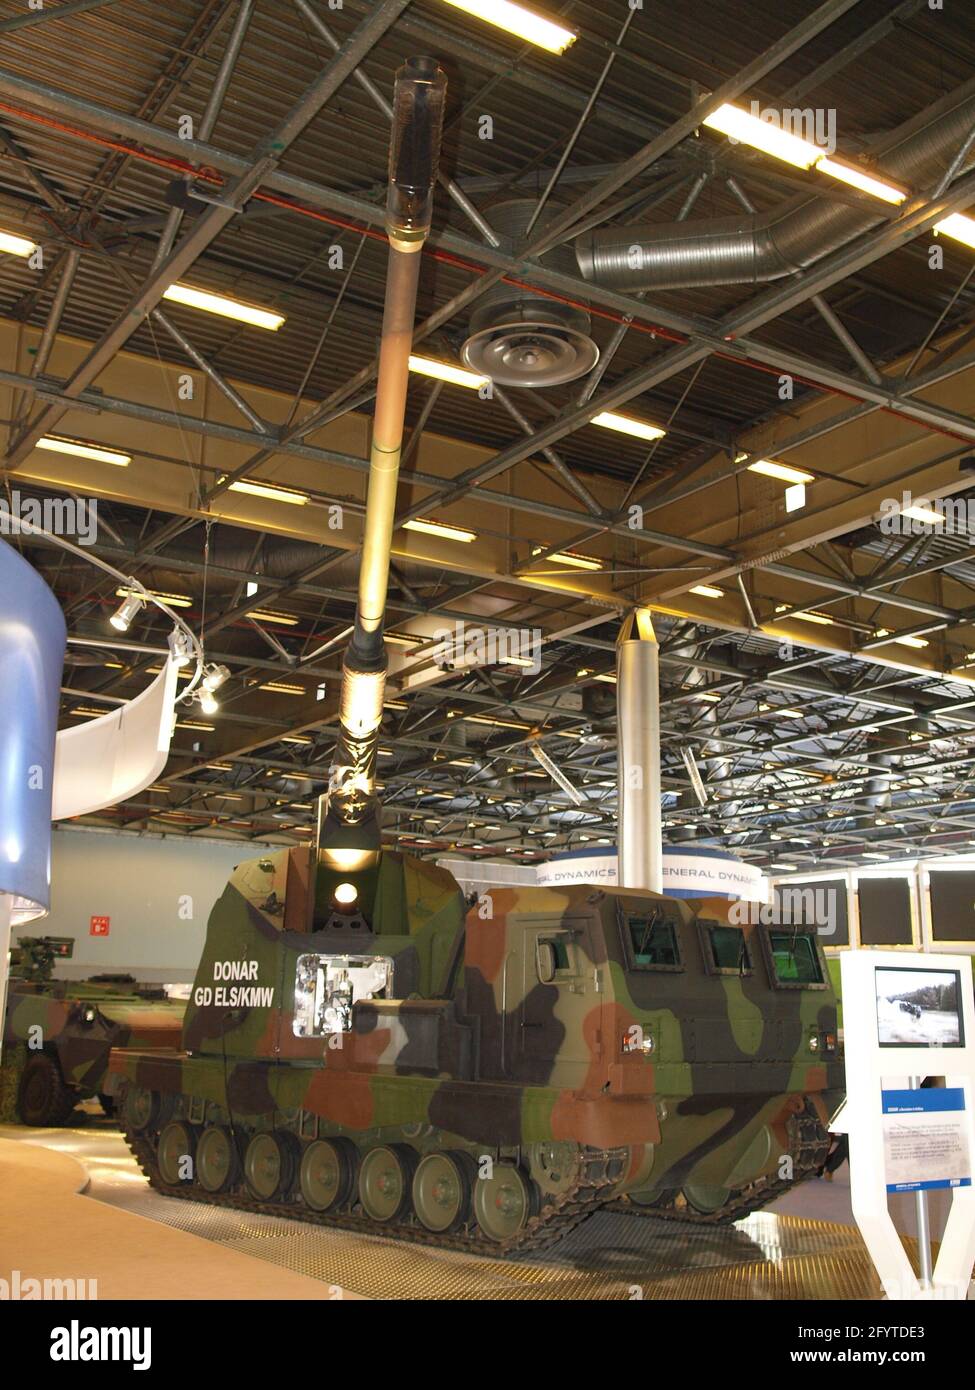 DONAR 155mm self-propelled howitzer at Eurosatory 2008 military exibition Stock Photo